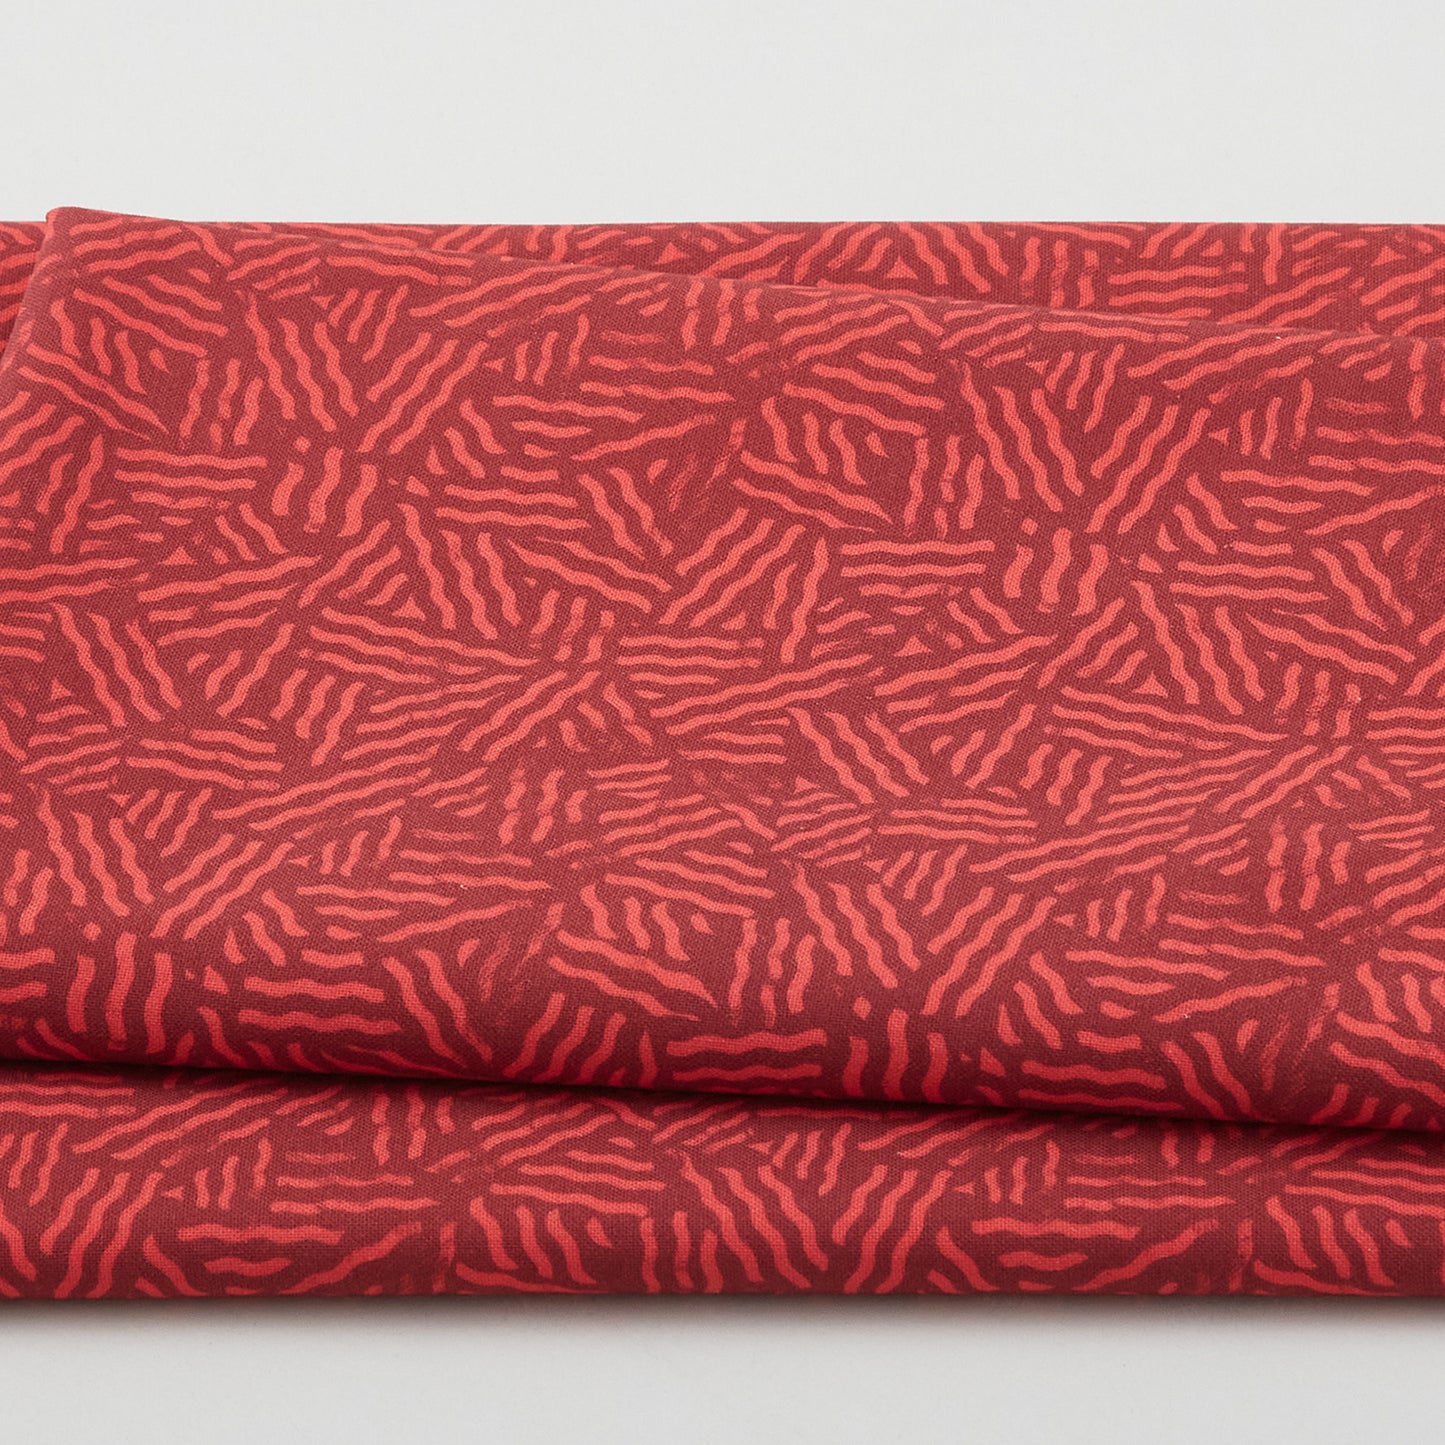 Electric Flow - Wavy Lines Red 2 Yard Cut Primary Image